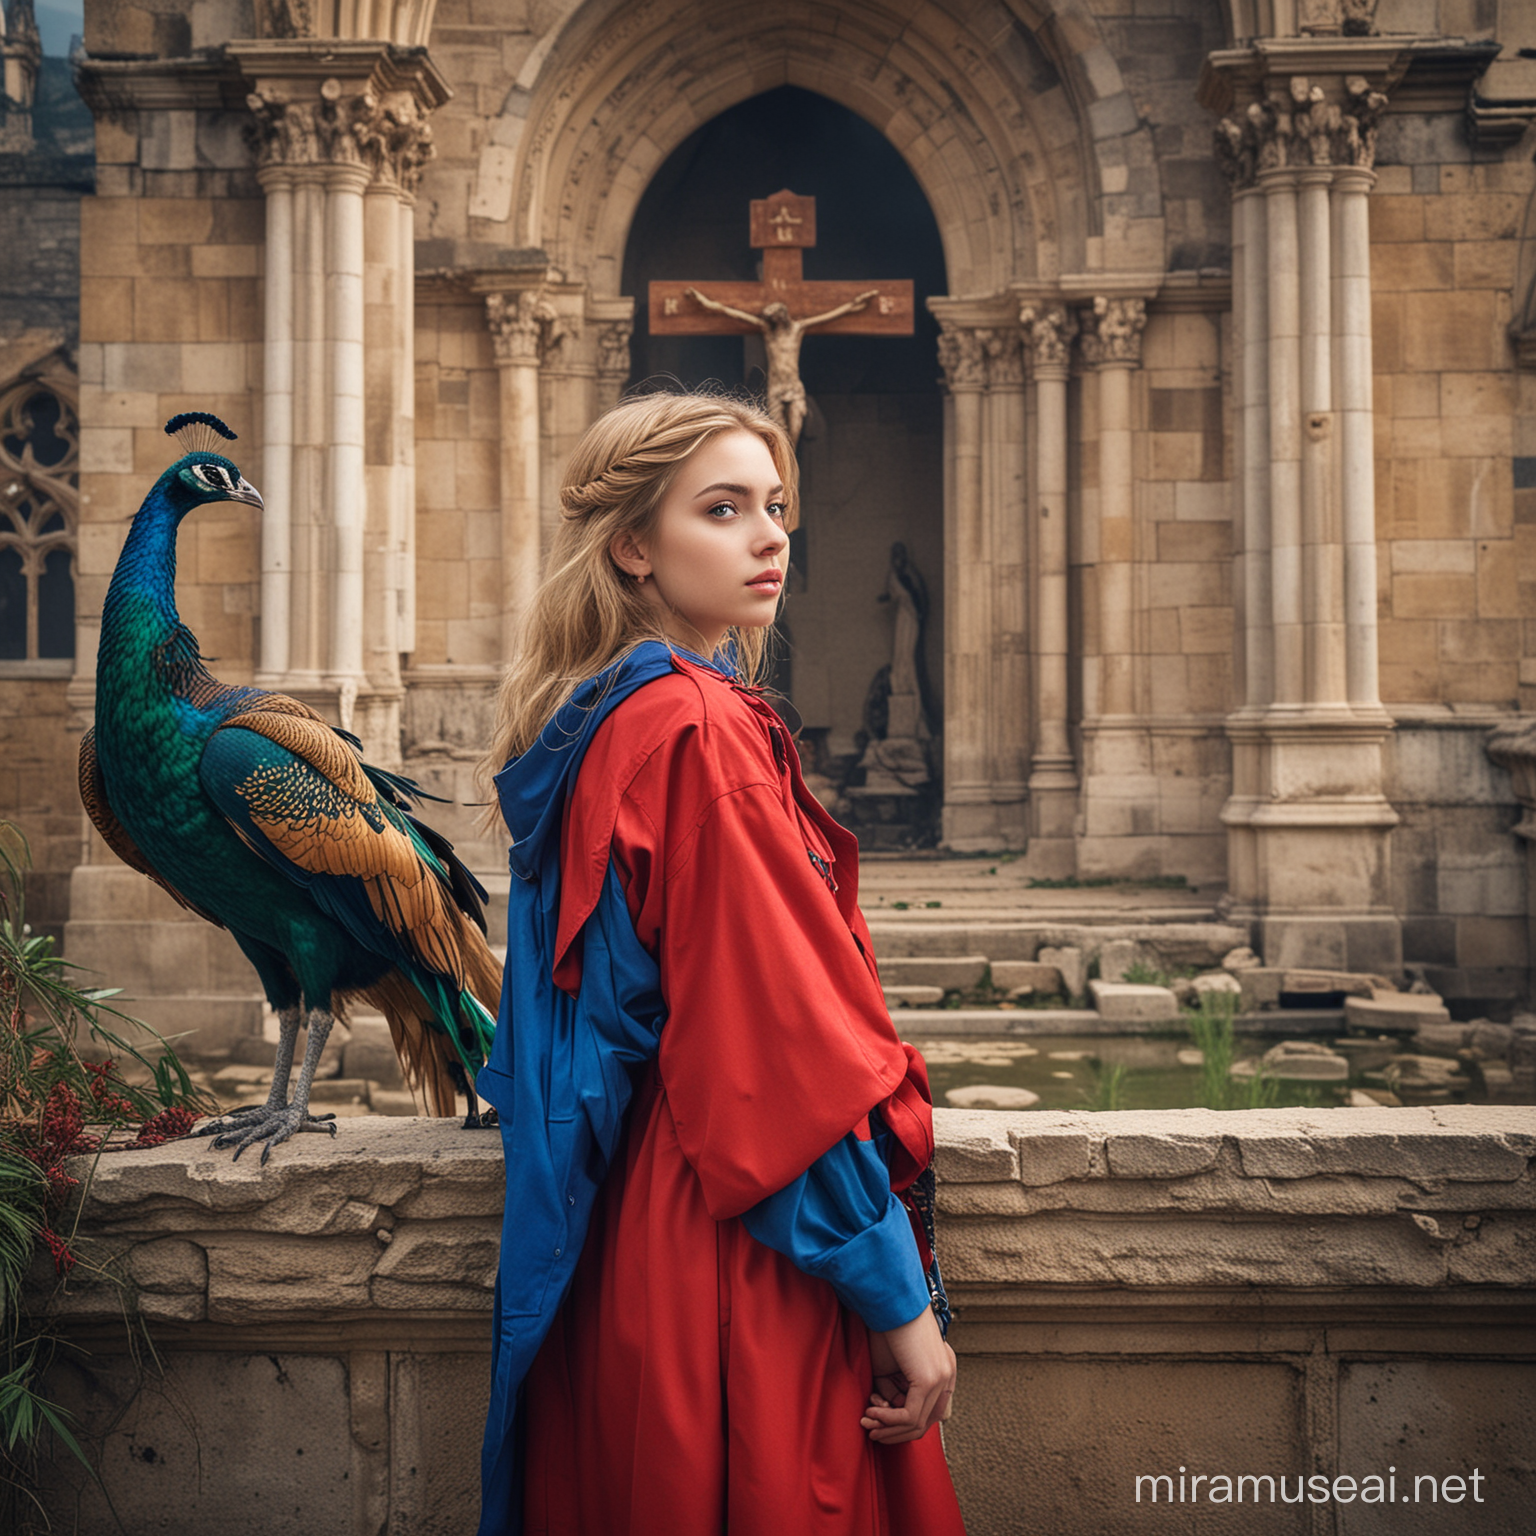 Commanding Teenage Goddess with Peacock and Worshipers at BloodBathed Church